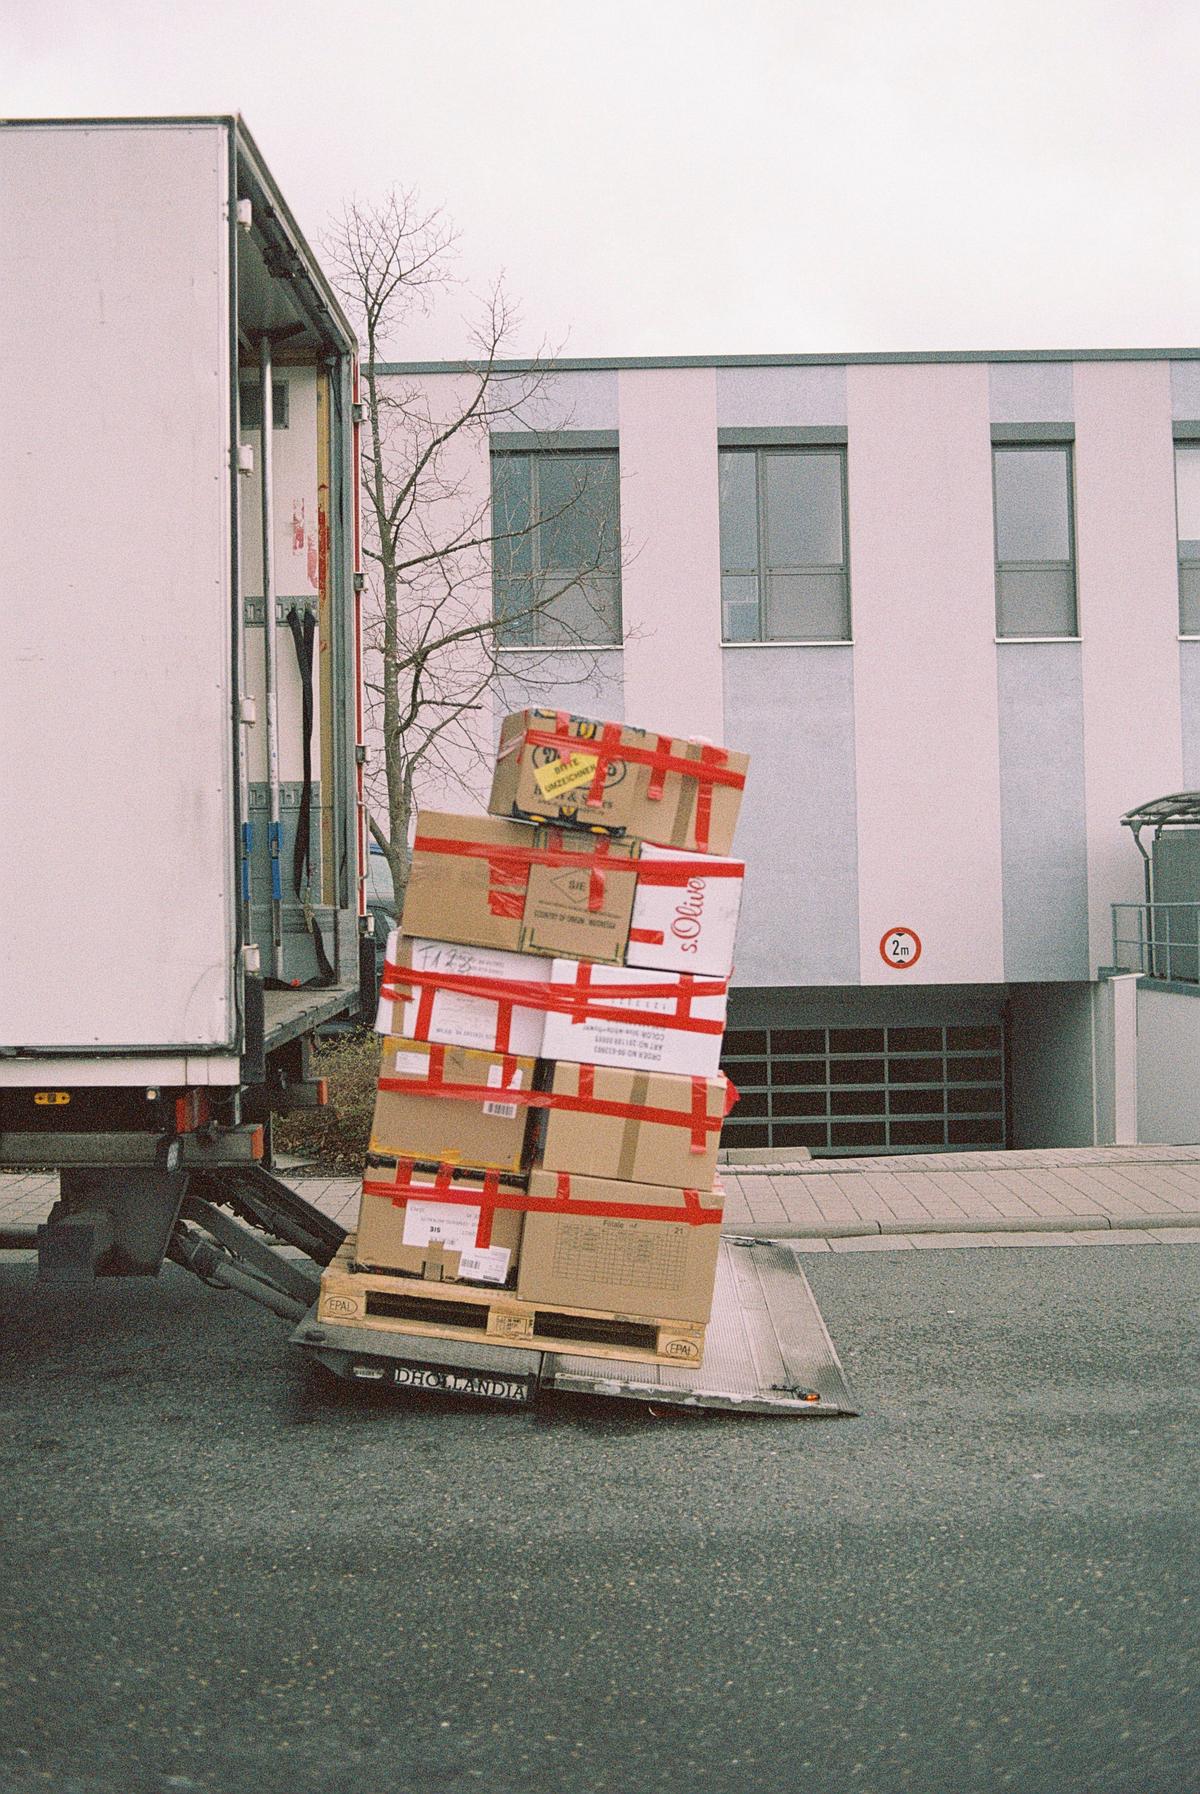 Image showing a moving truck with boxes, symbolizing the value of a moving company